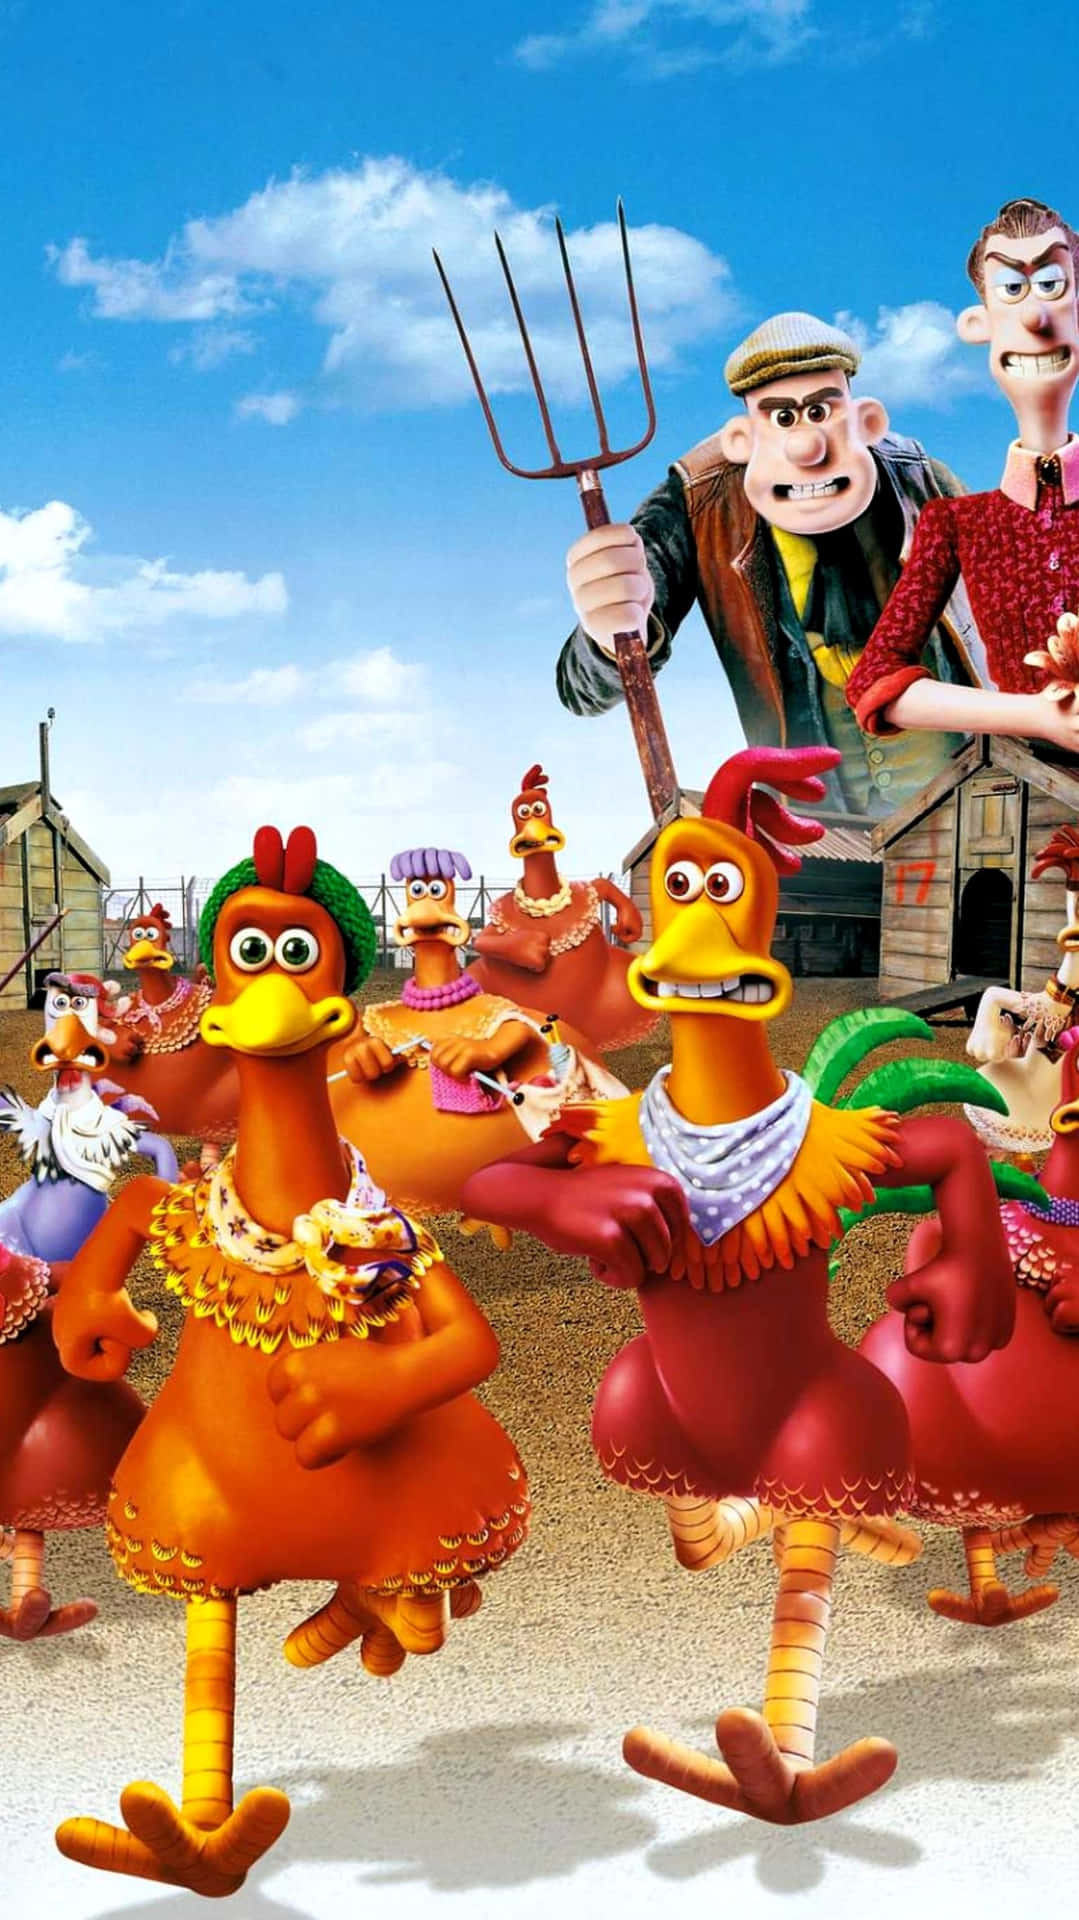 A Cartoon With Chickens And Other Characters